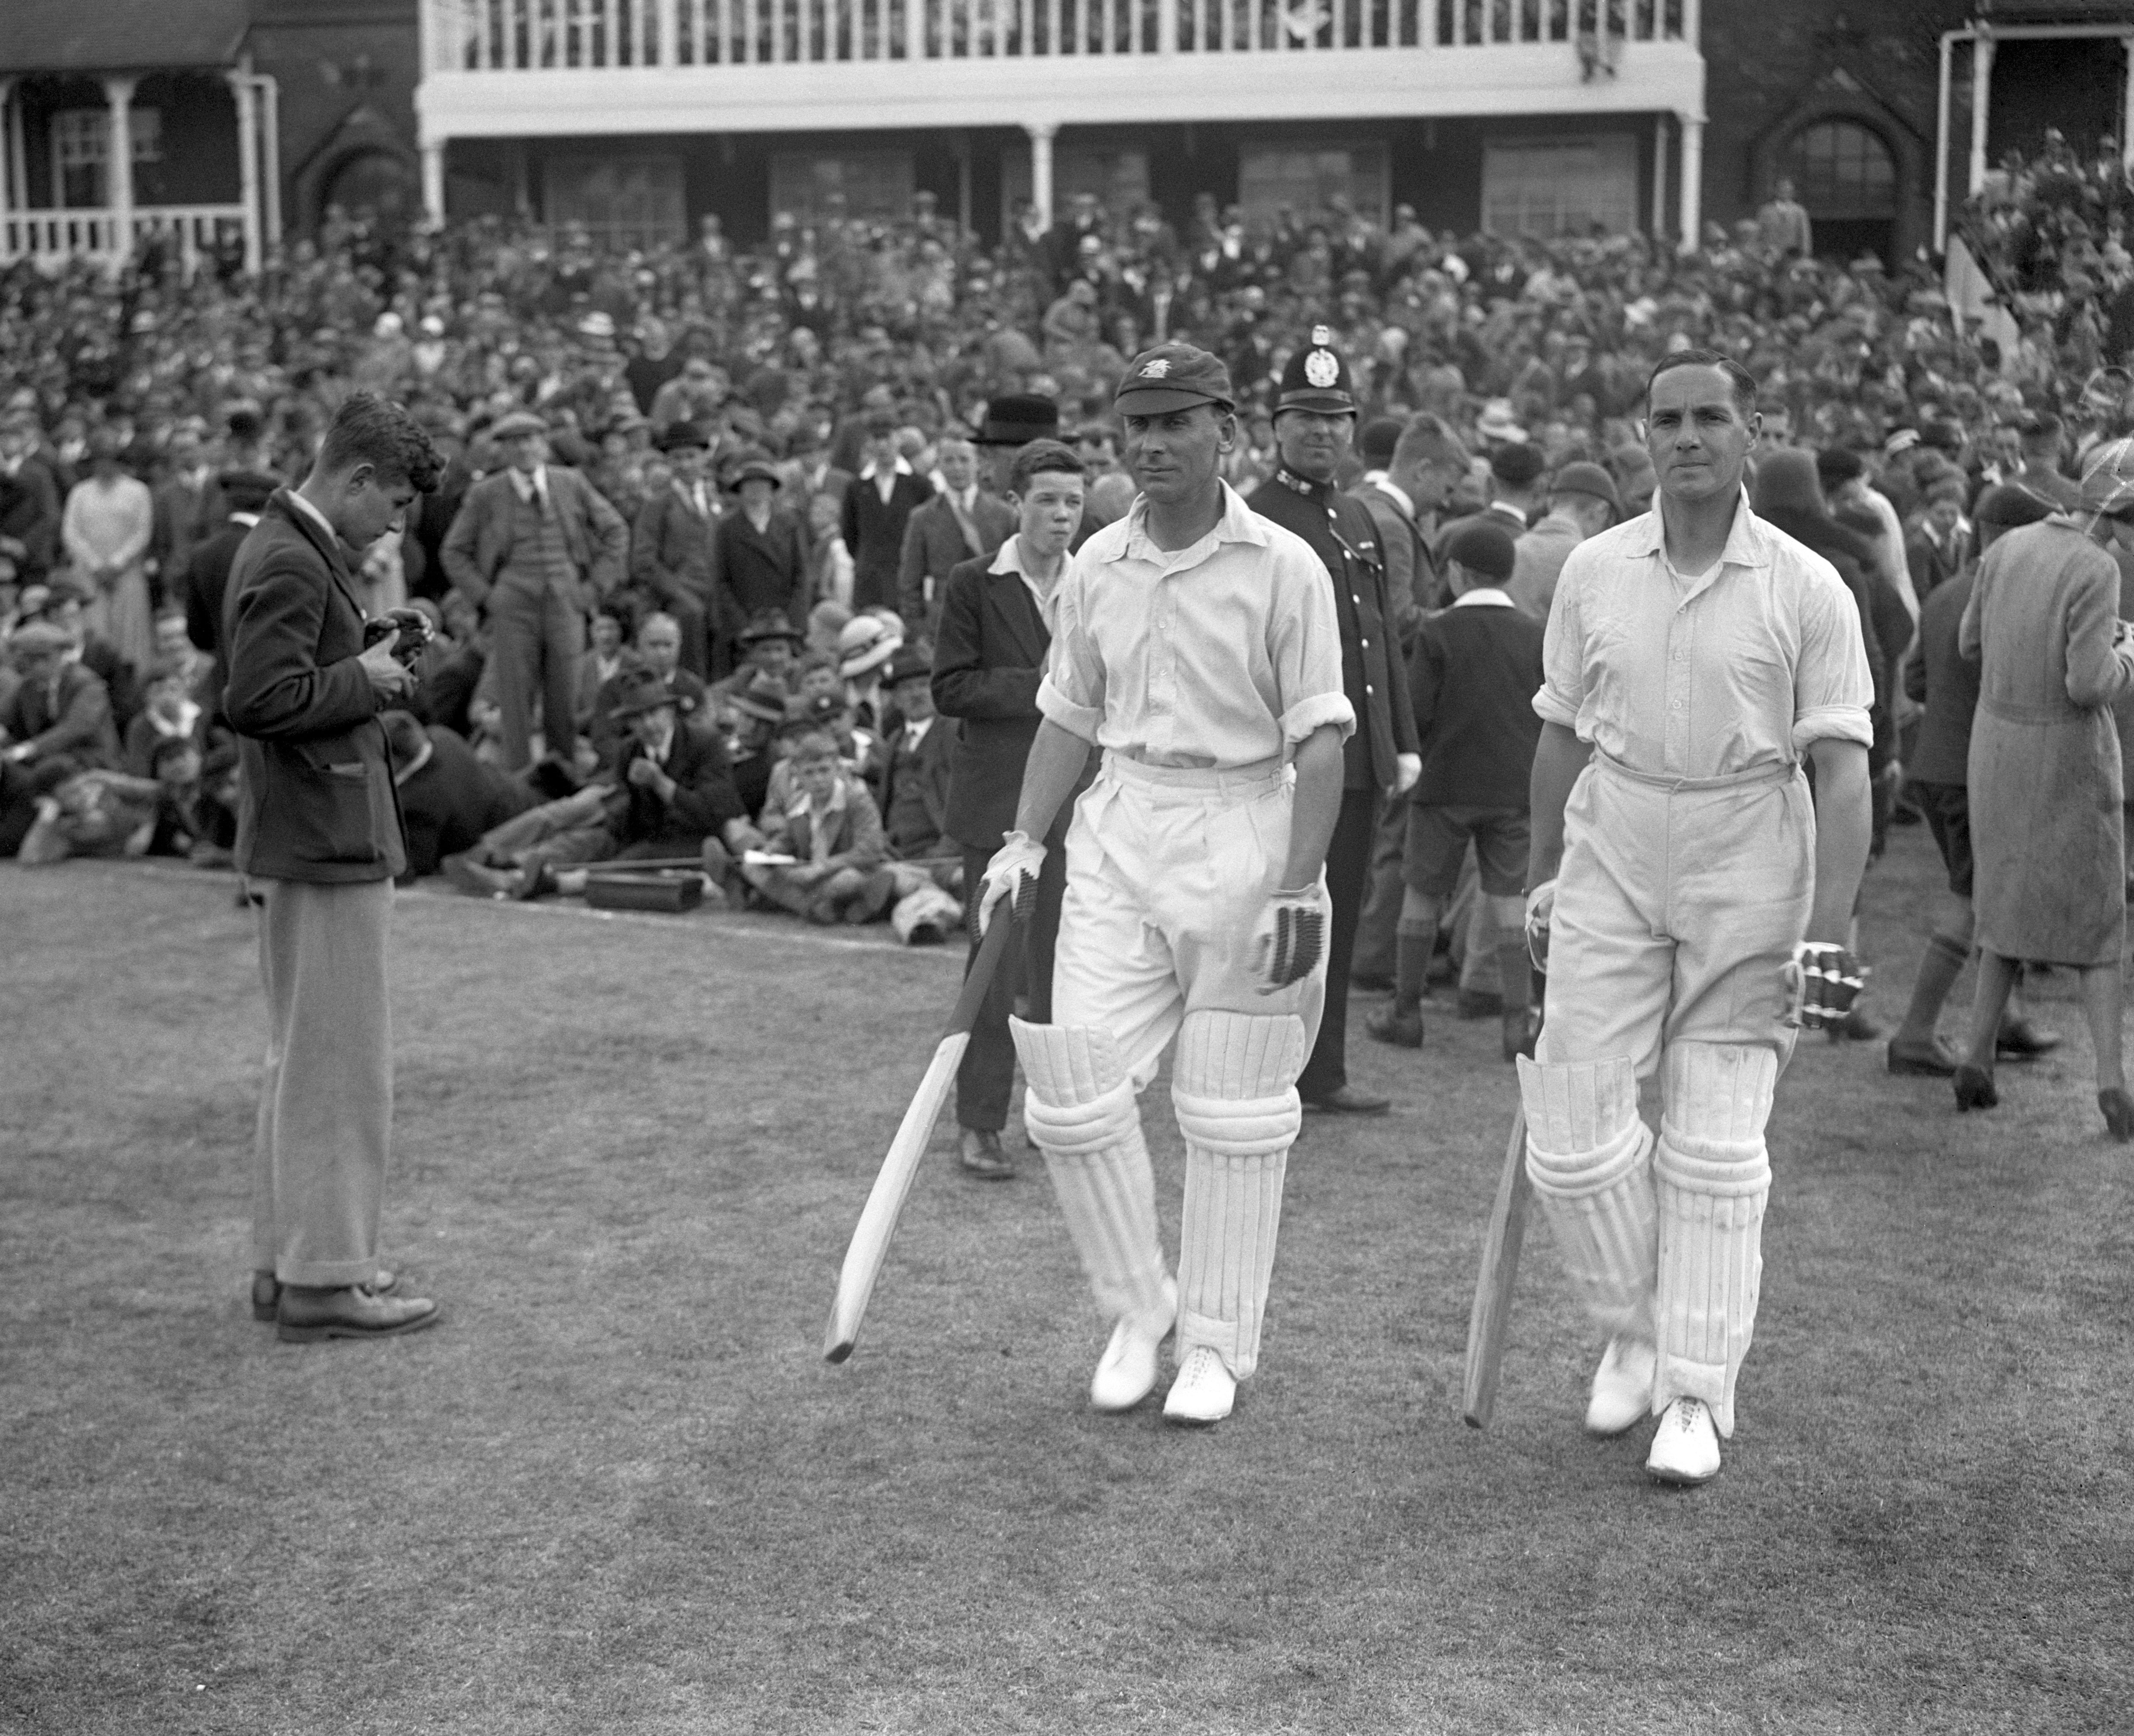 Herbert Sutcliffe (right) guided England to victory in the third Test at the MCG in 1928 (PA)